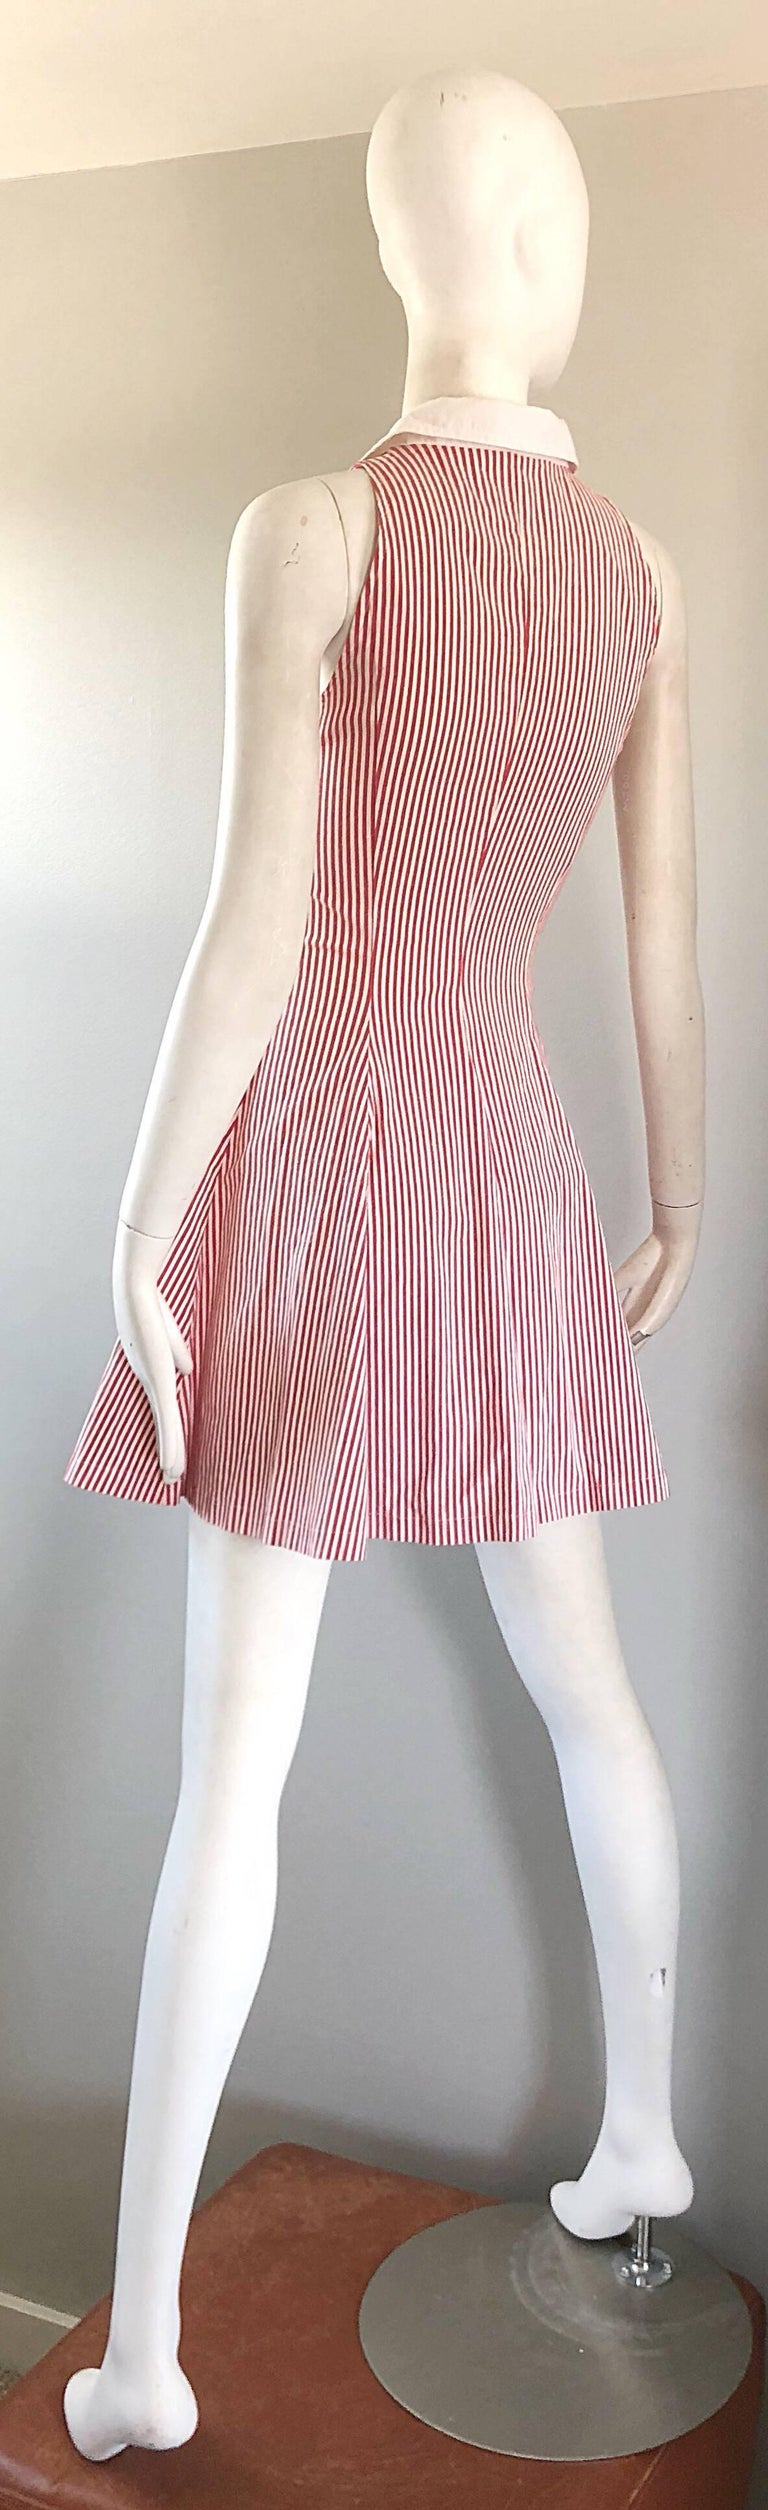 1980s Angelo Tarlazzi Vintage Red and White Seersucker Nautical Striped Dress  For Sale 4